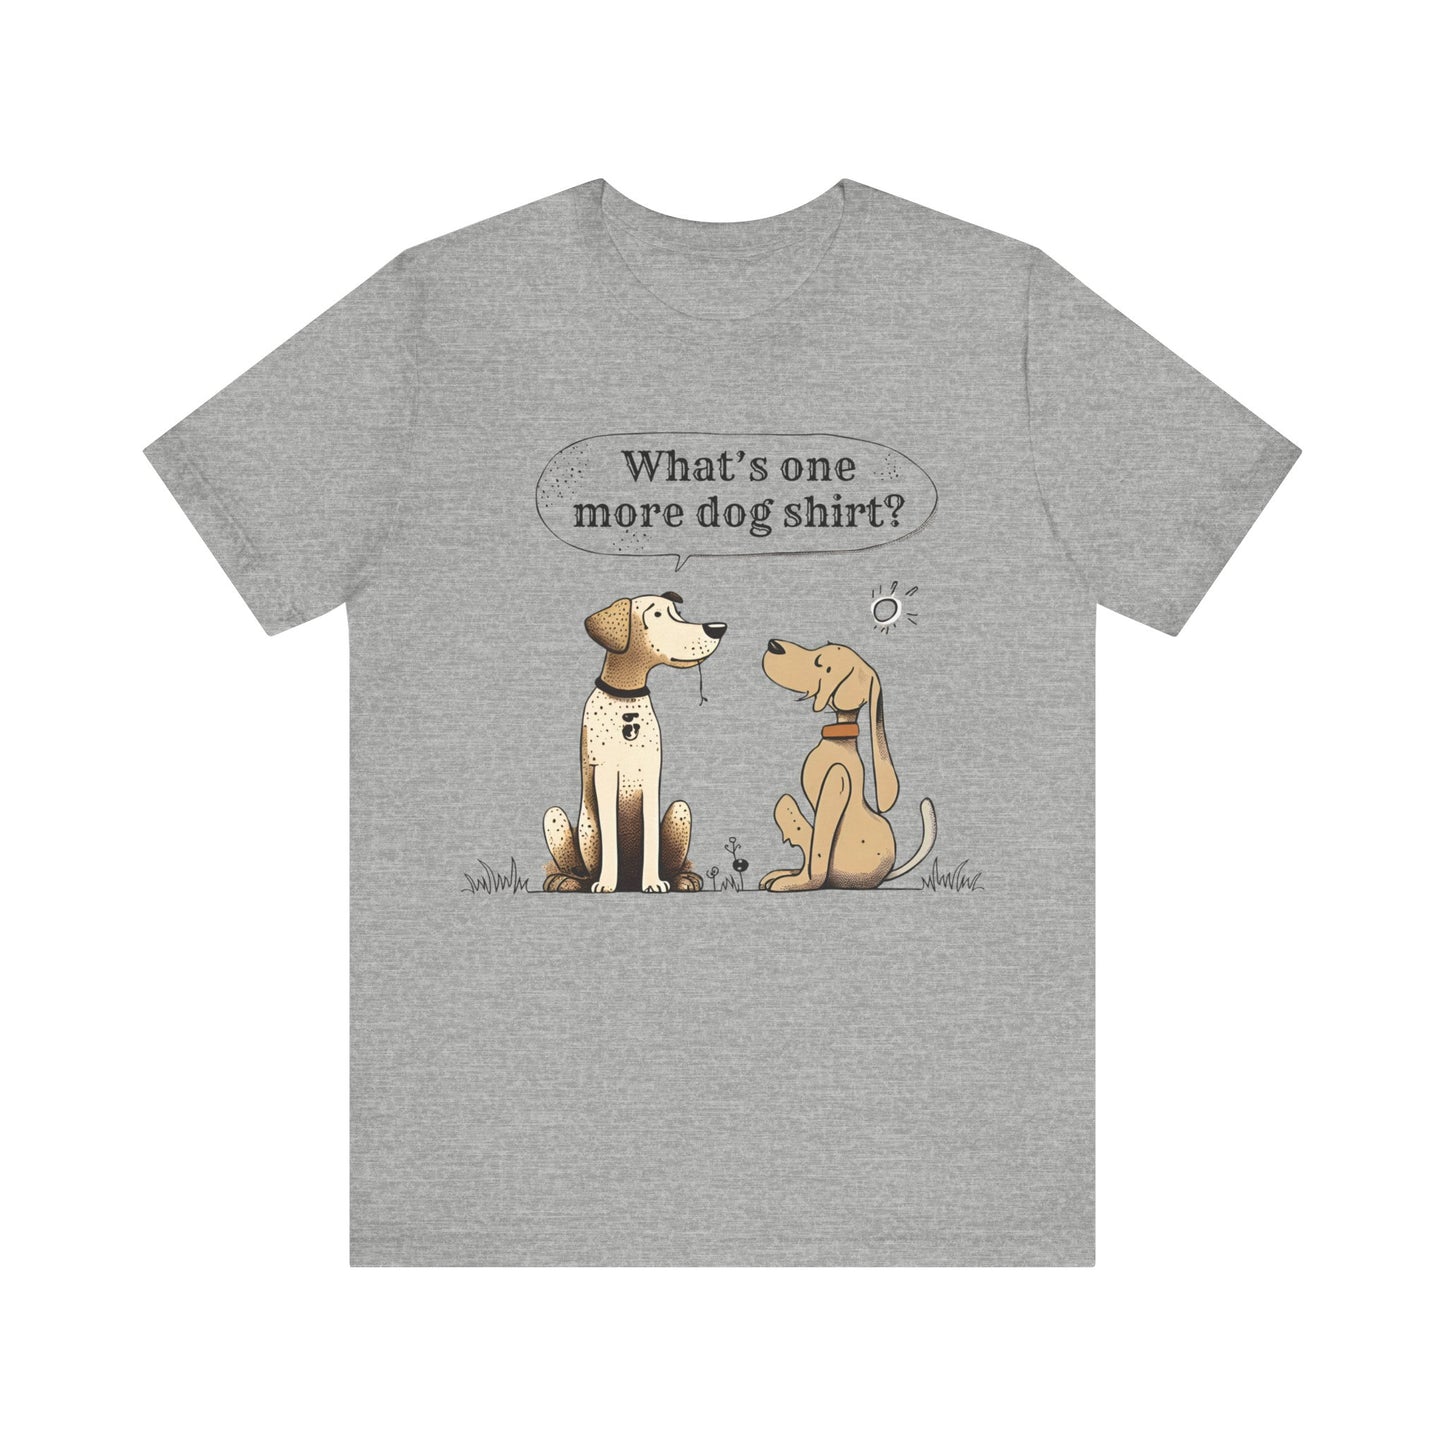 What's one more dog shirt?